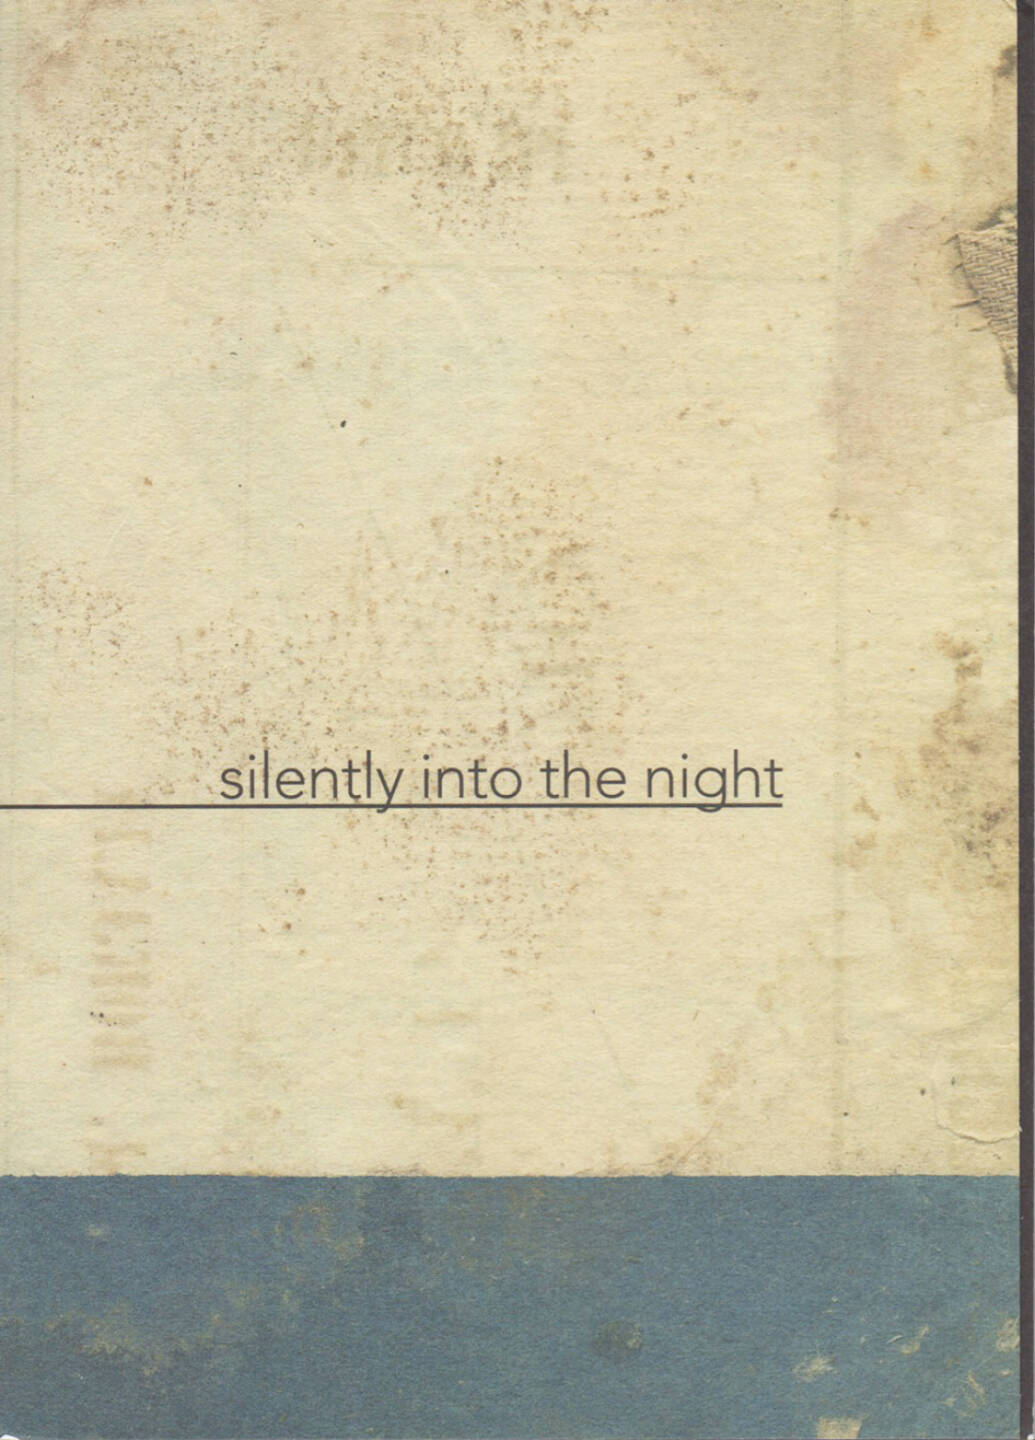 Katrien de Blauwer - I do not want to disappear silently into the night, Avarie 2014, Cover - http://josefchladek.com/book/katrien_de_blauwer_-_i_do_not_want_to_disappear_silently_into_the_night